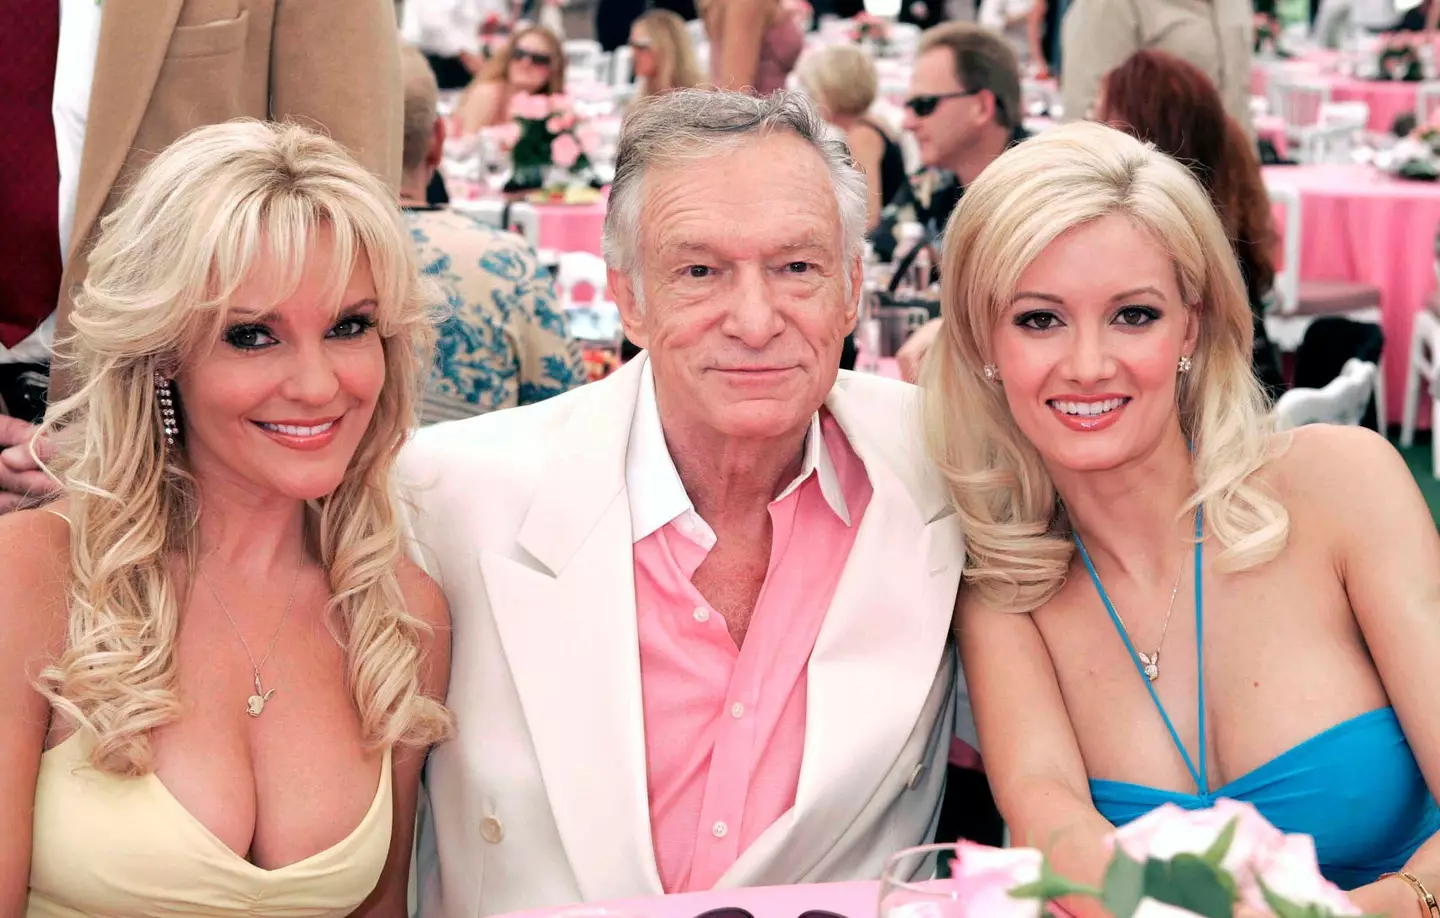 Playboy has distanced itself from Hefner in the wake of the allegations.